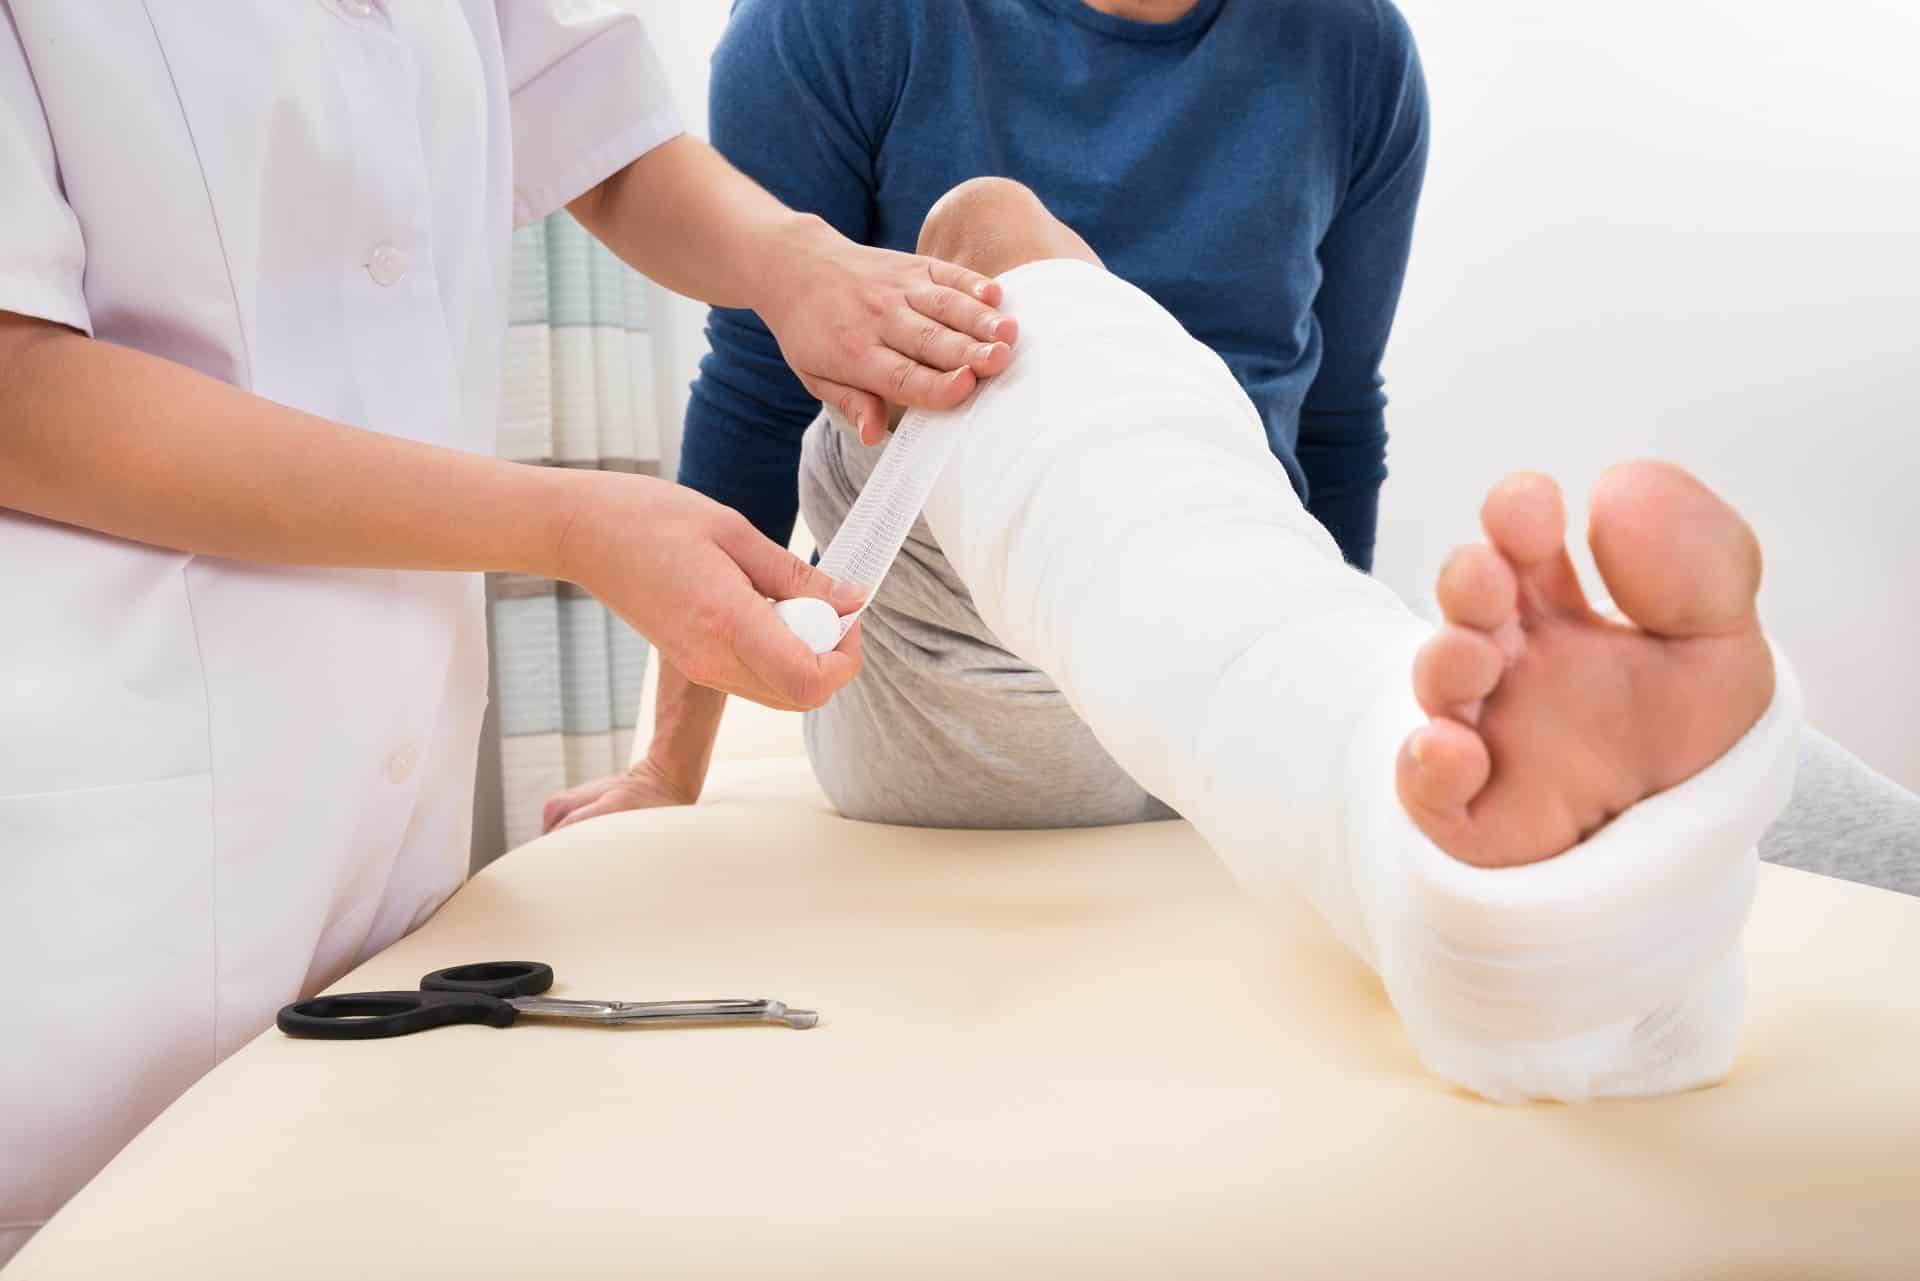 How Your Employer Could Be Held Responsible After A Workplace Injury In New York